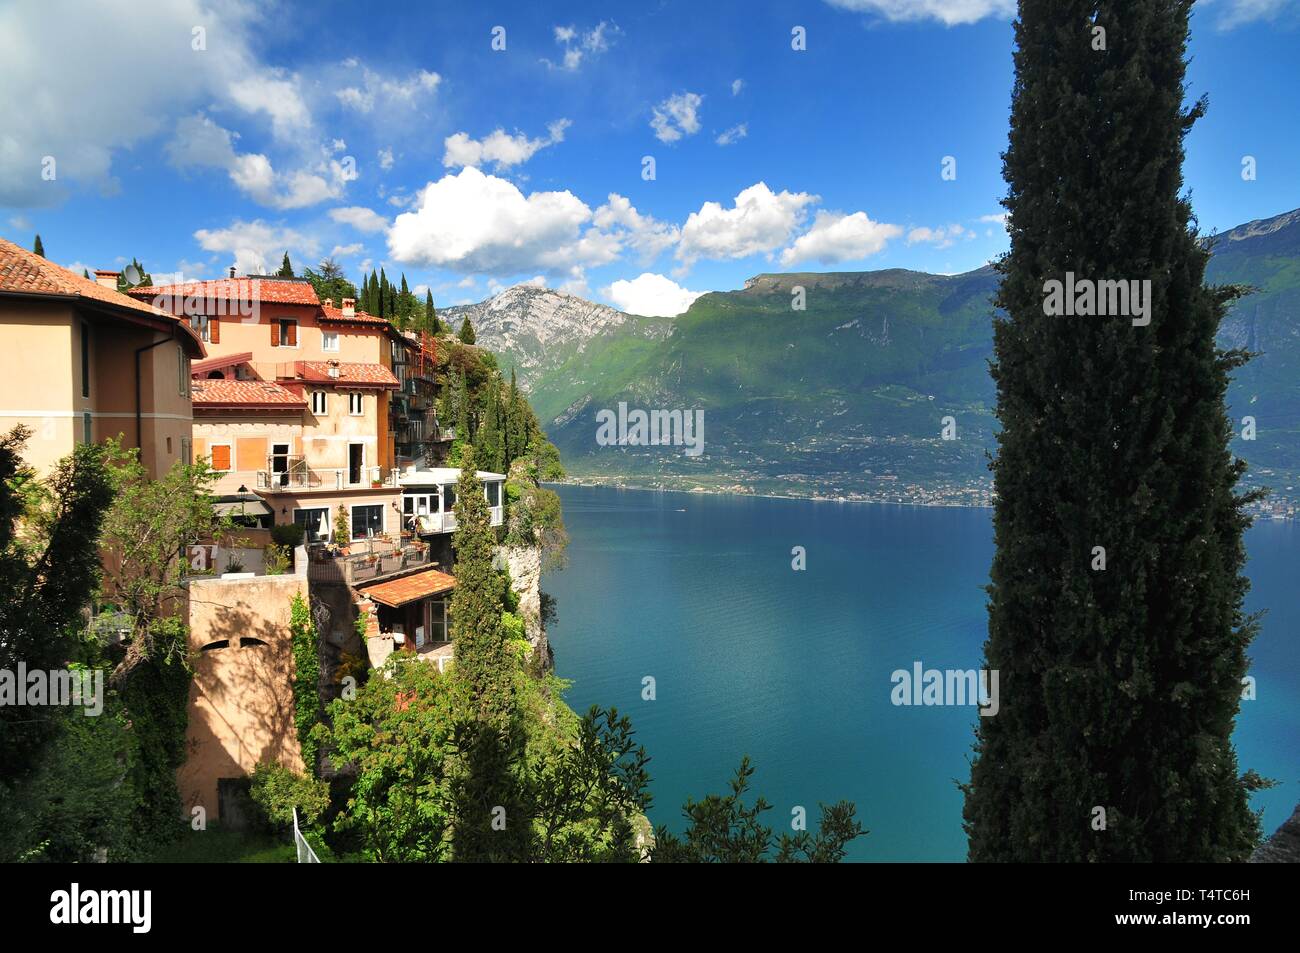 Pieve, district of the municipality Tremosine, overlooking the east bank of the lake, Lake Garda, Lombardy, Italy, Europe Stock Photo